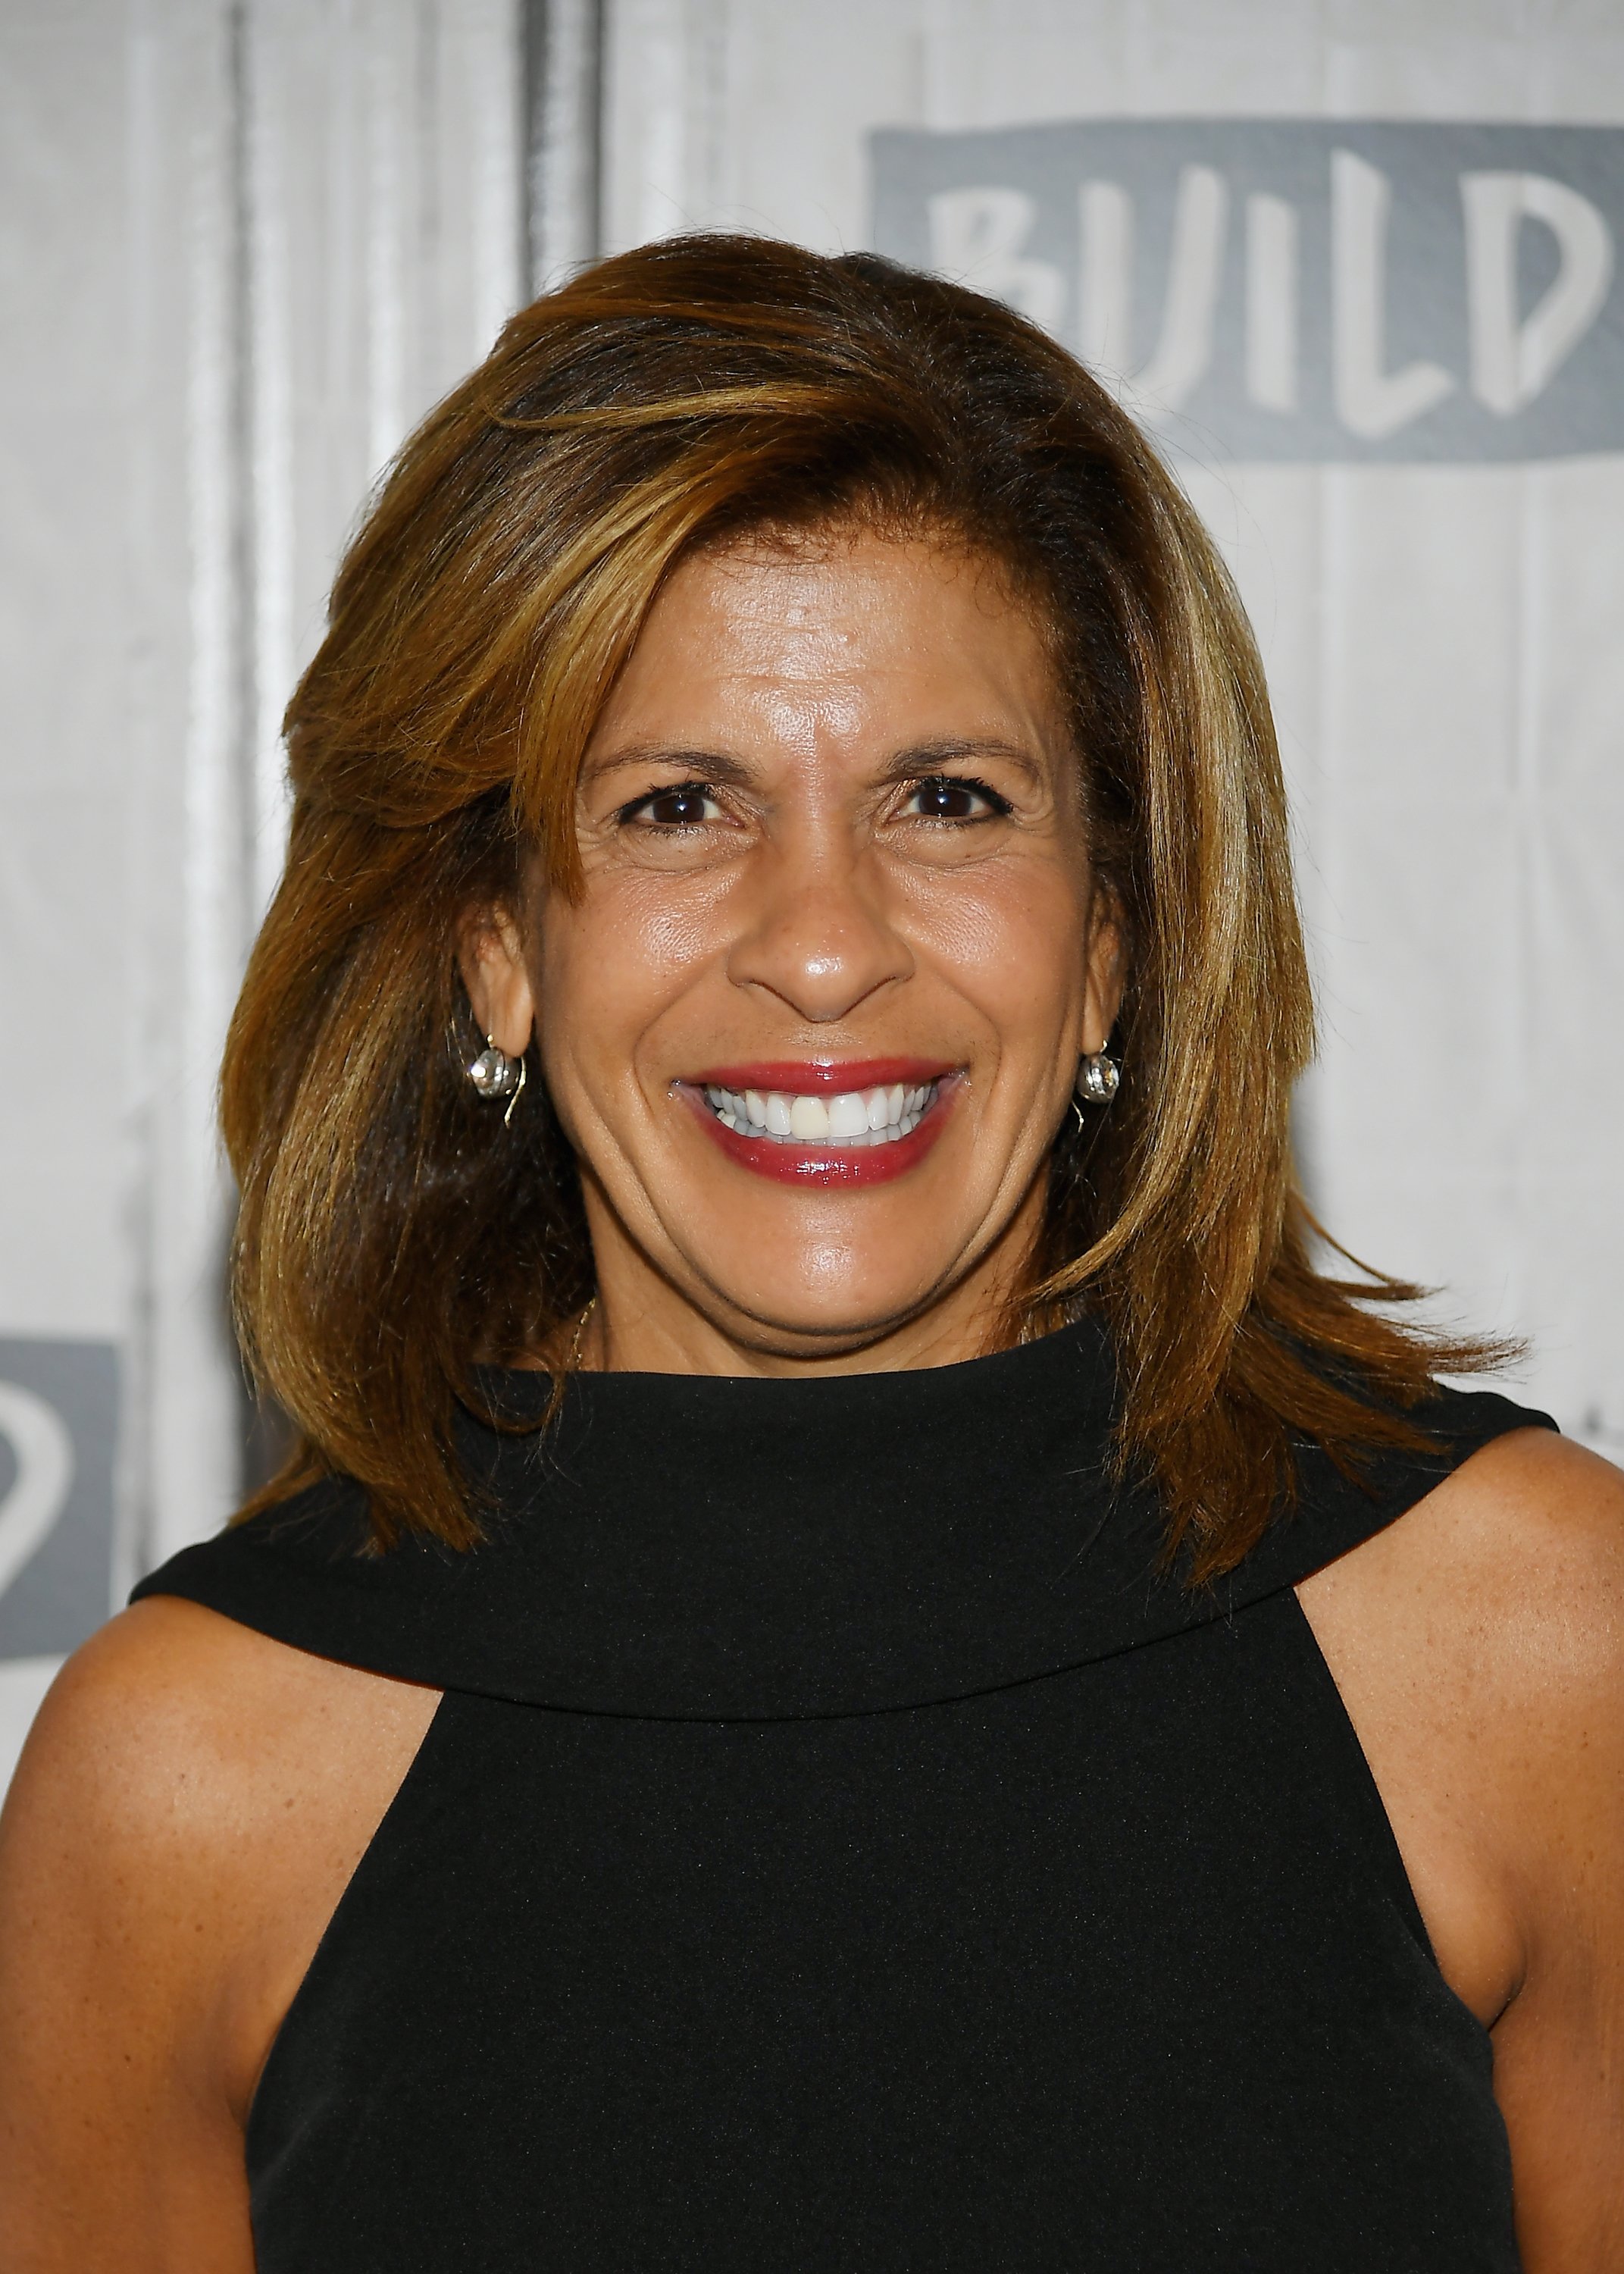 Hoda Kotb at Build Studio for the discussion of her book "You Are My Happy" in 2019 | Source Getty Images